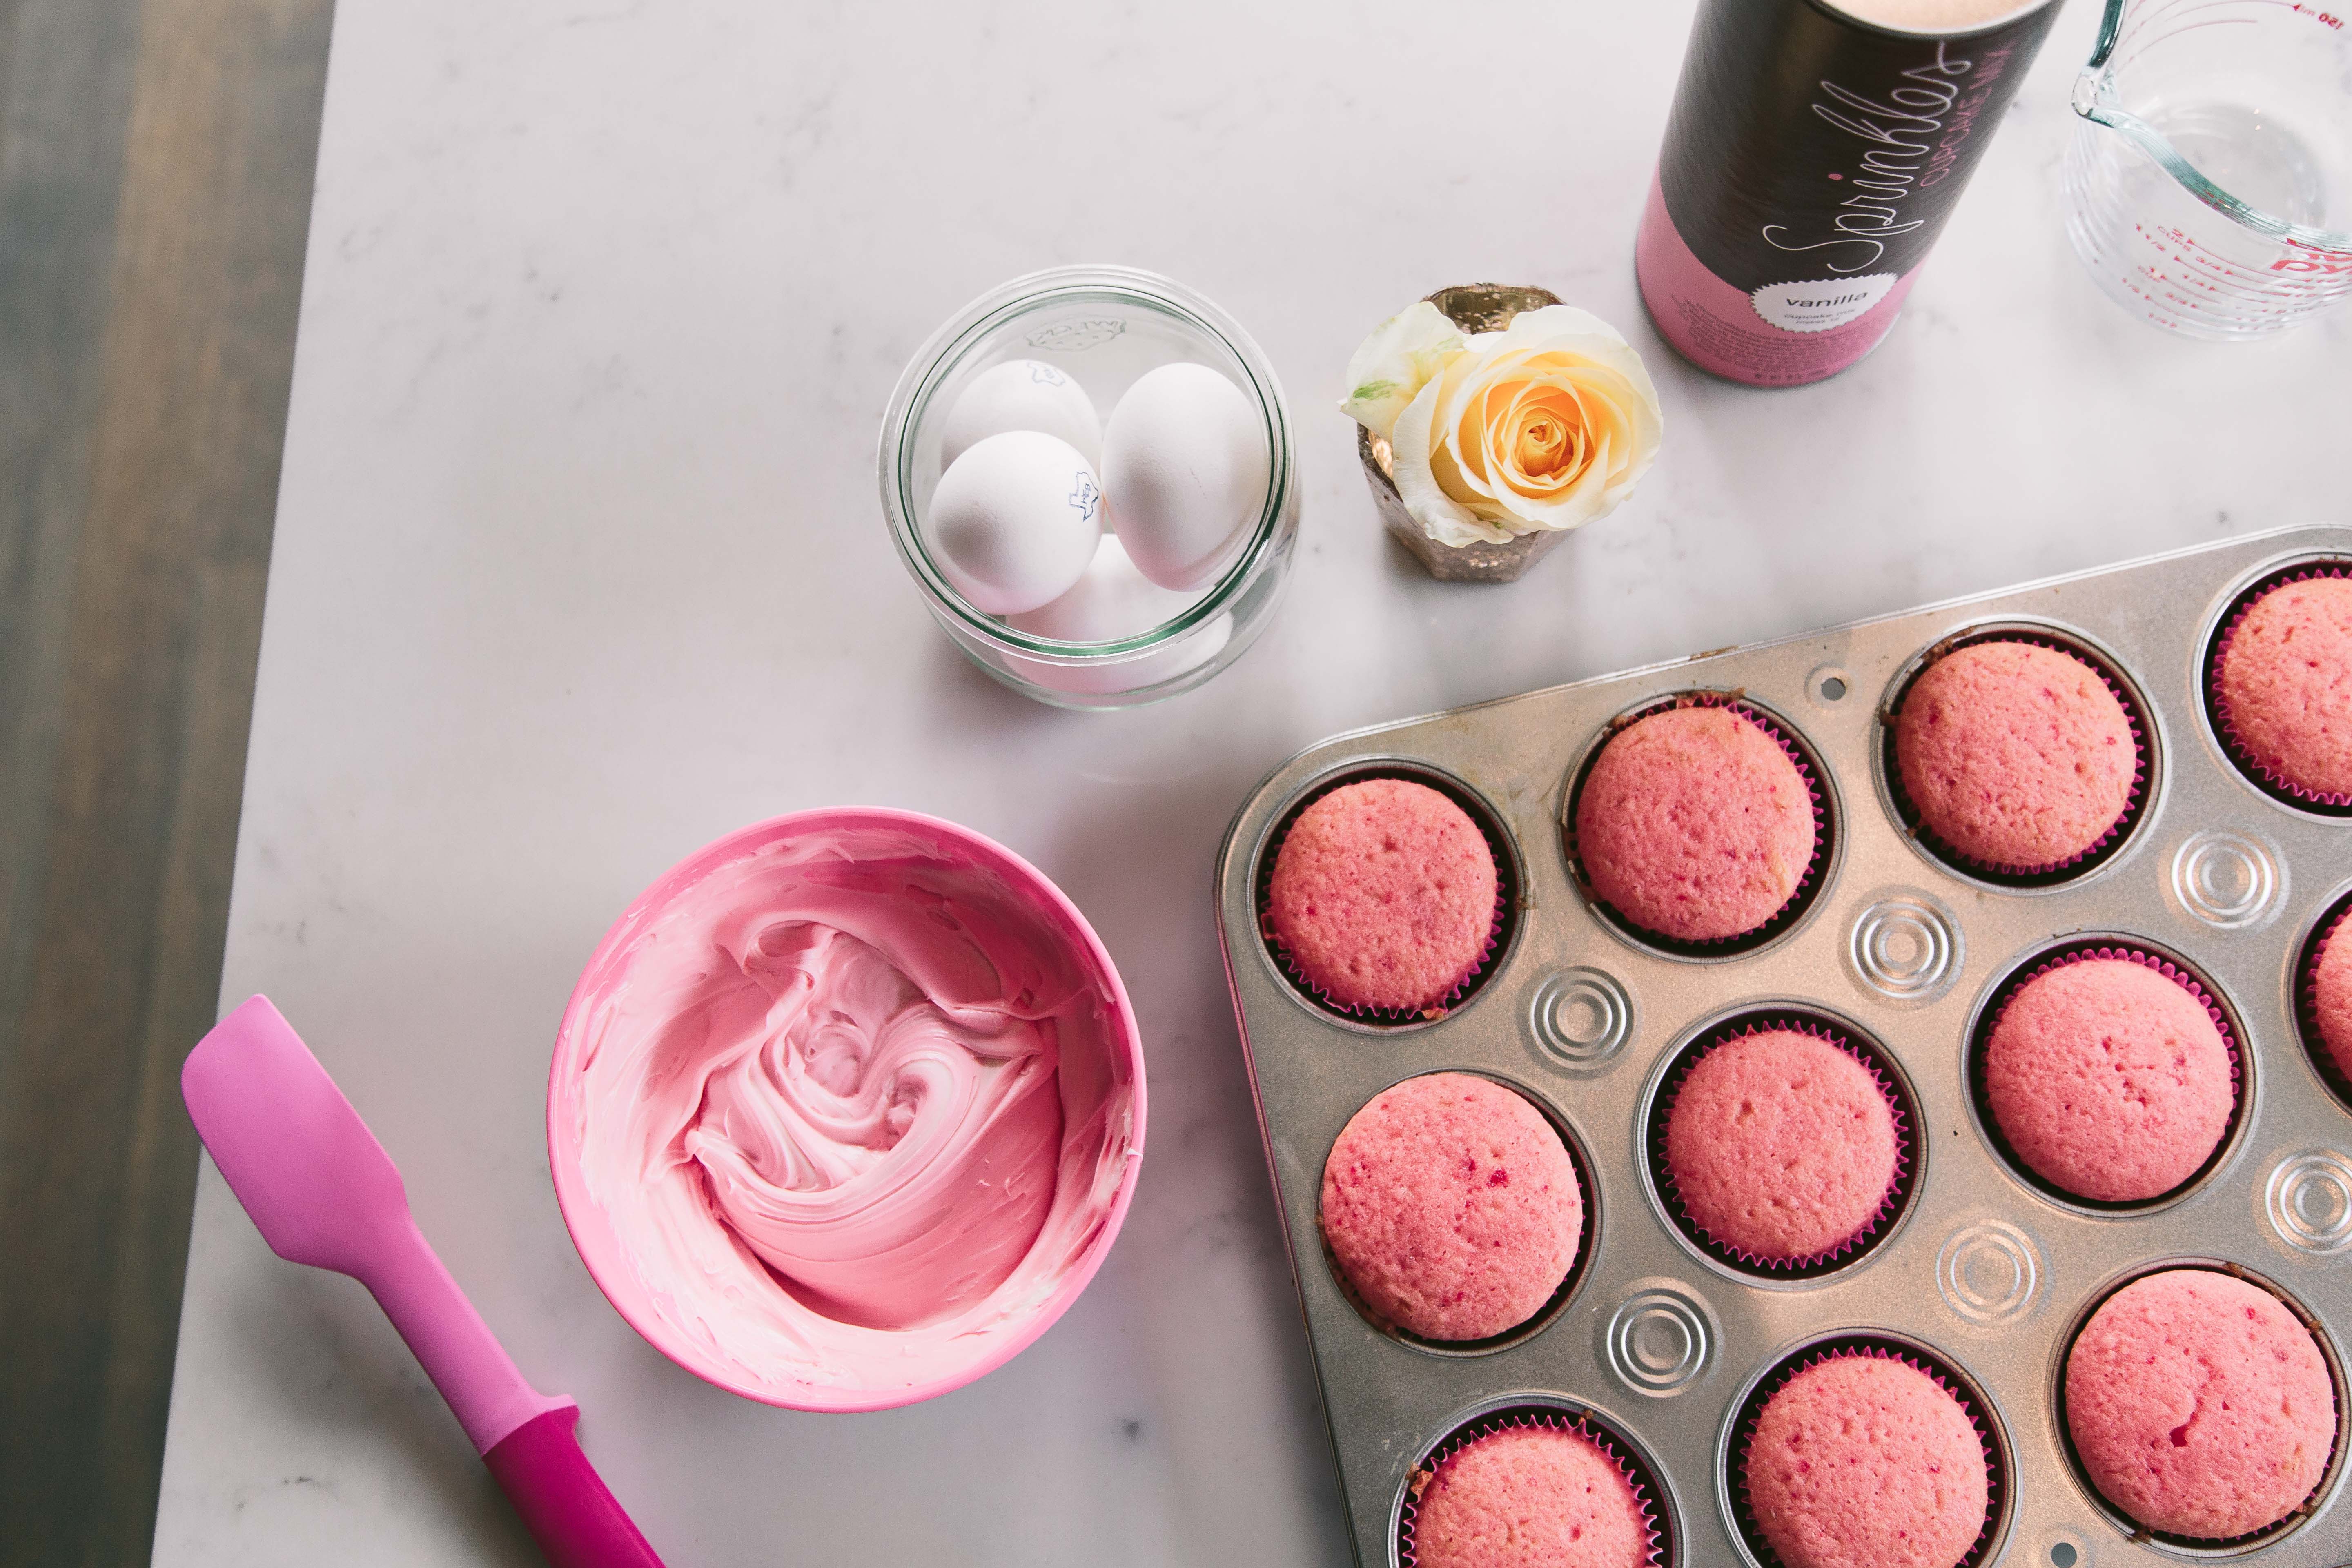 Cupcake frosting ideas